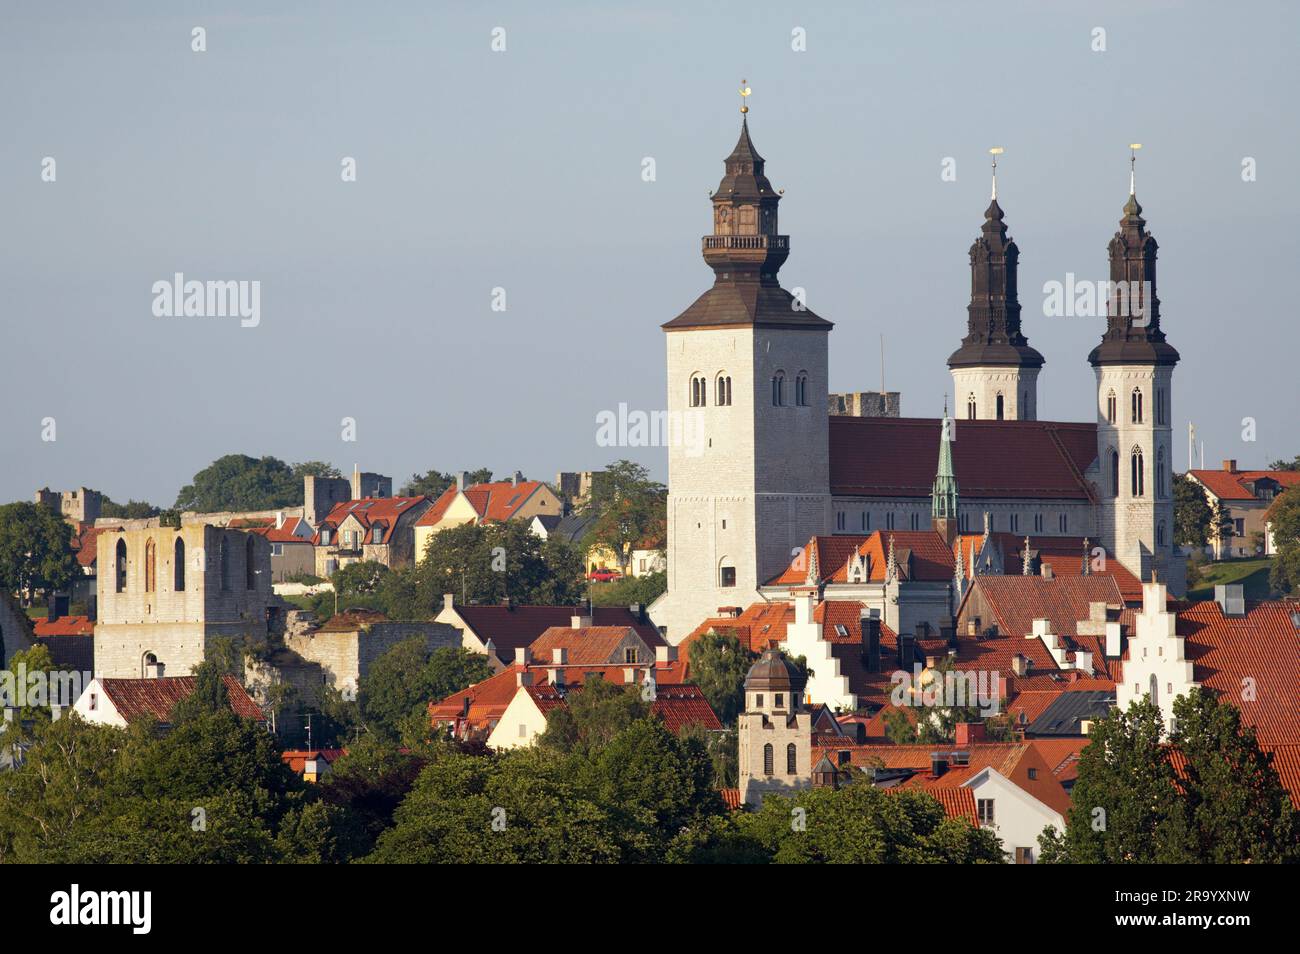 High section of trees and houses with cathedral against clear sky at Visby, Gotland island, Sweden Stock Photo